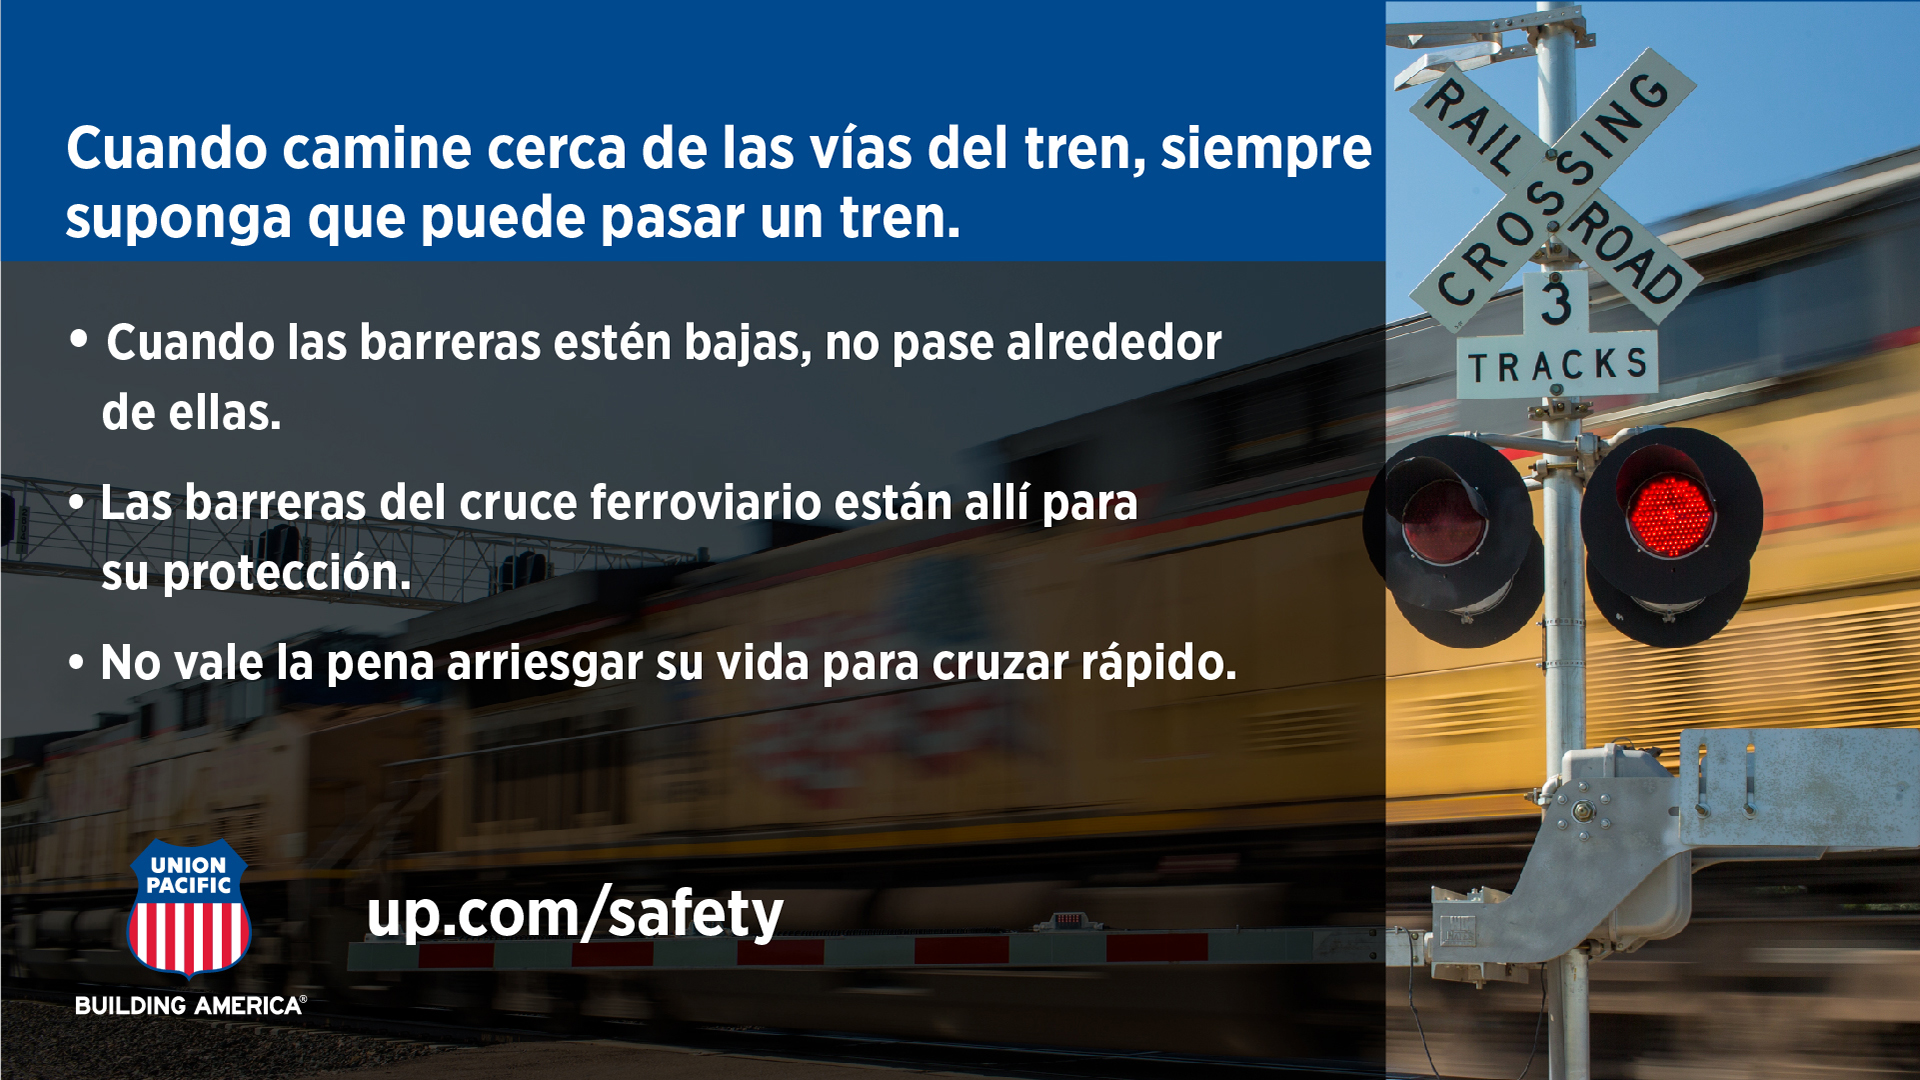 One of the campaign’s safety messages translated into Spanish, reminding drivers to always expect a train and never go around the crossing gate.